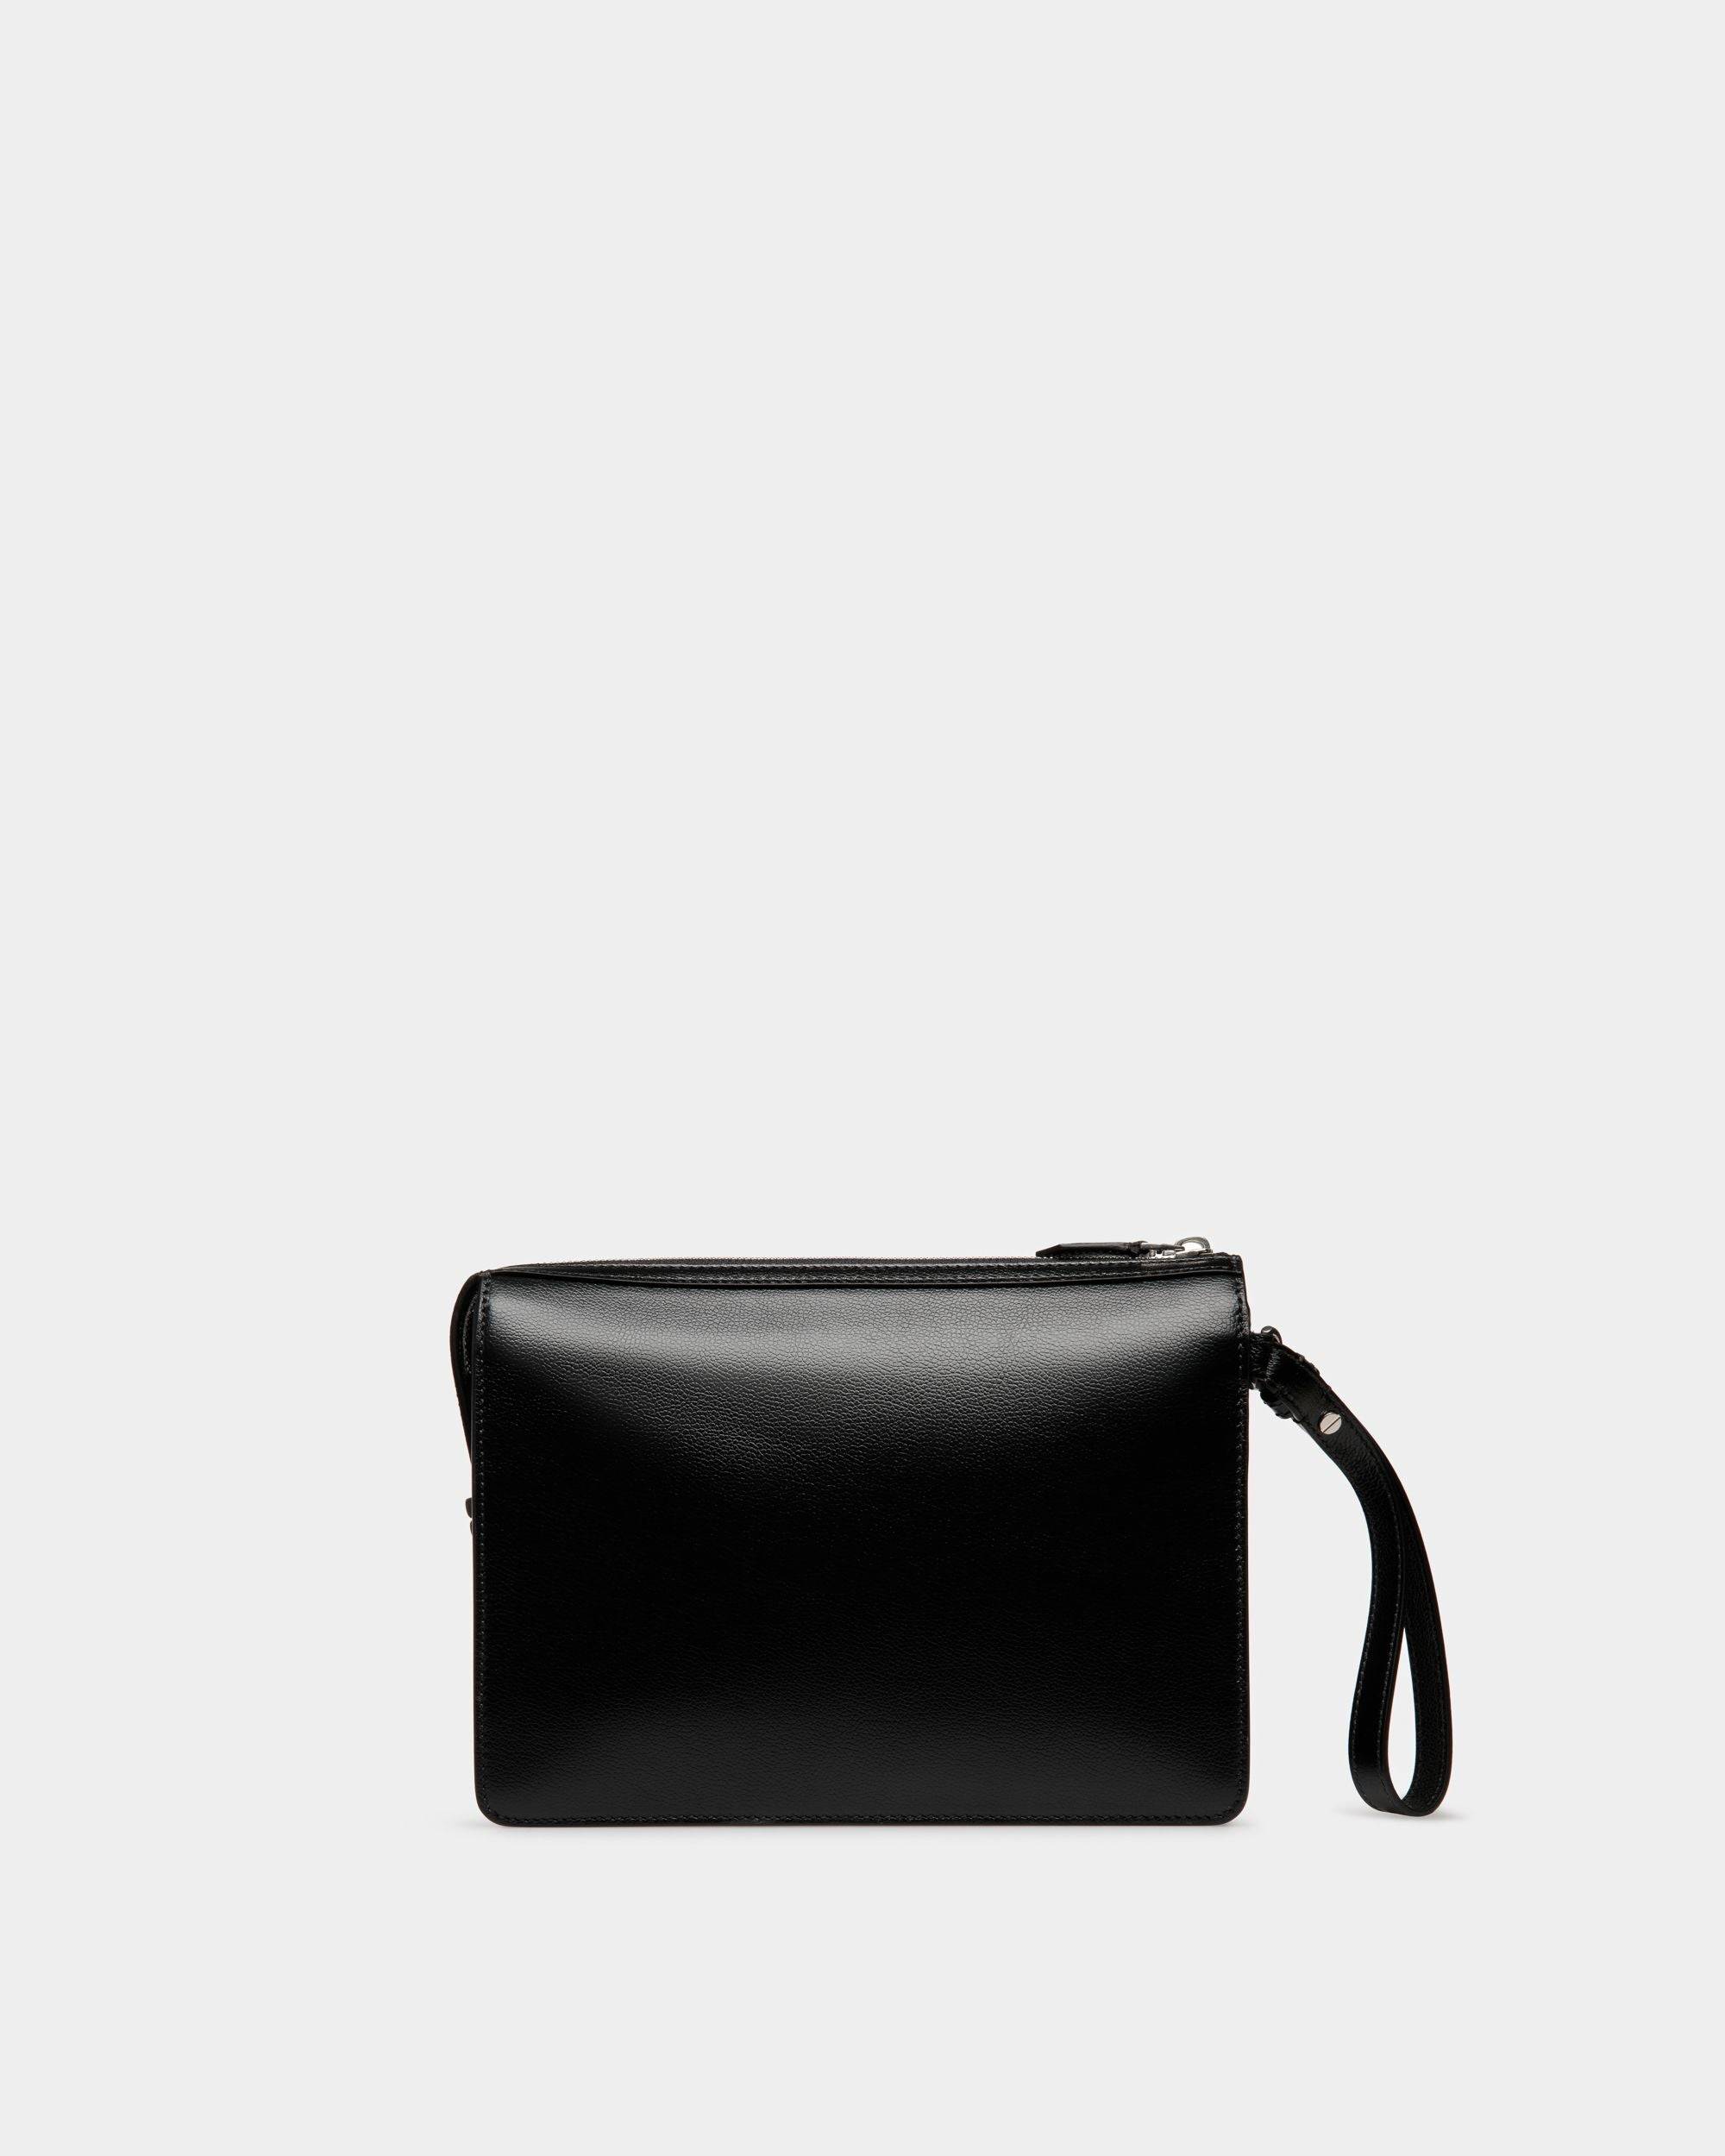 PM | Men's Clutches And Portfolios | Black Leather | Bally | Still Life Back